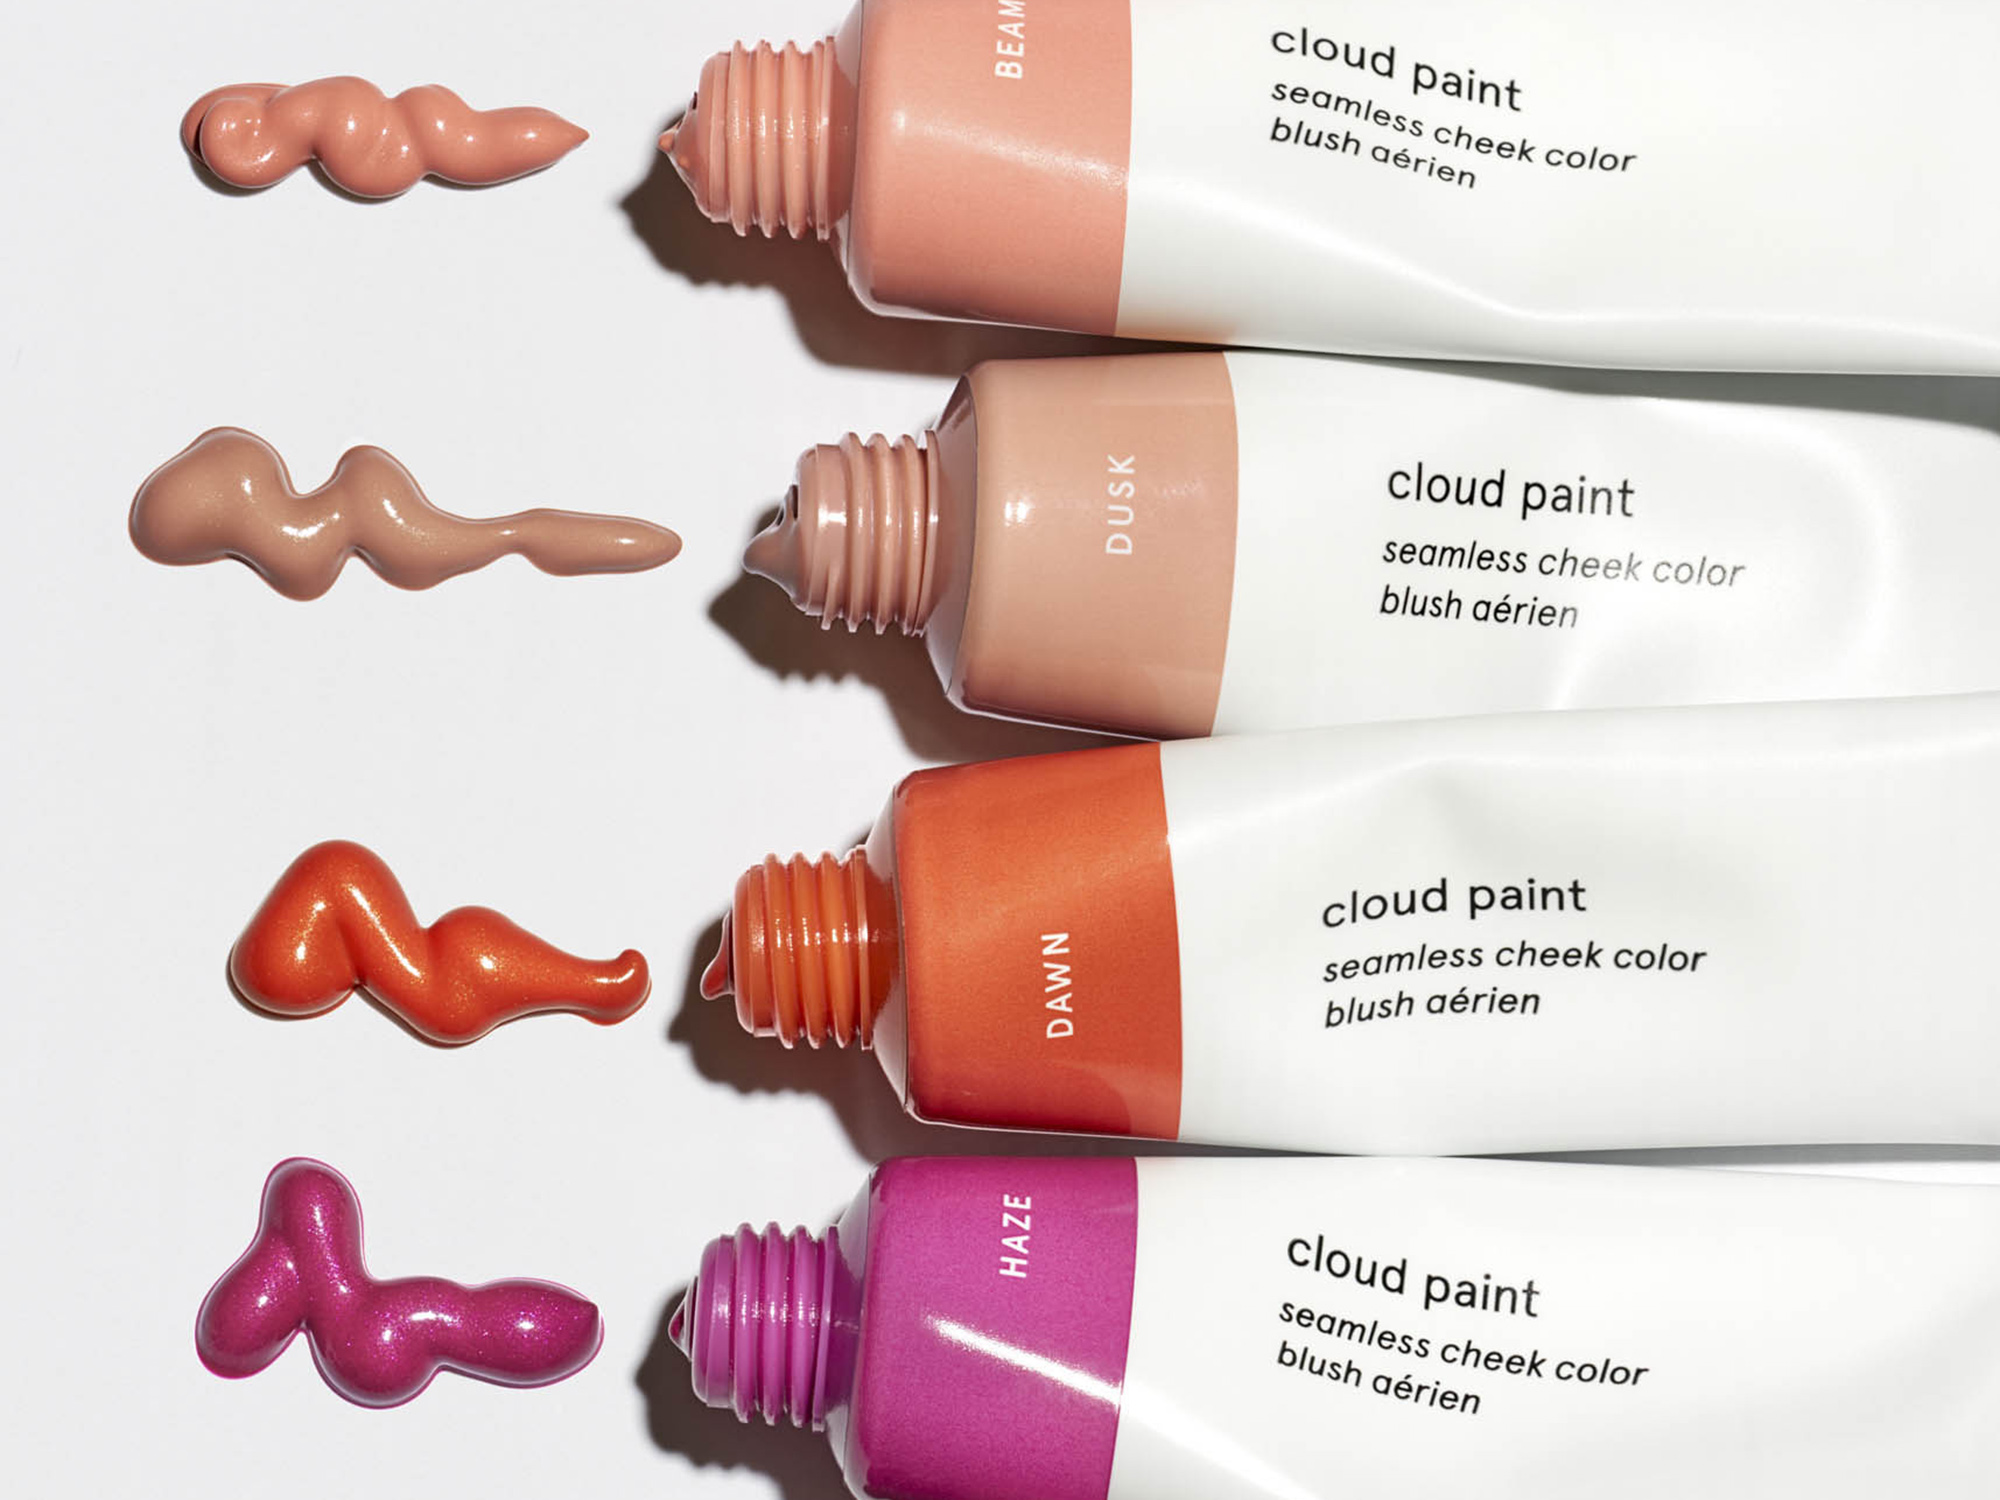 Glossier Is NYC's Newest Unicorn With $1.2 Billion Valuation - Bloomberg